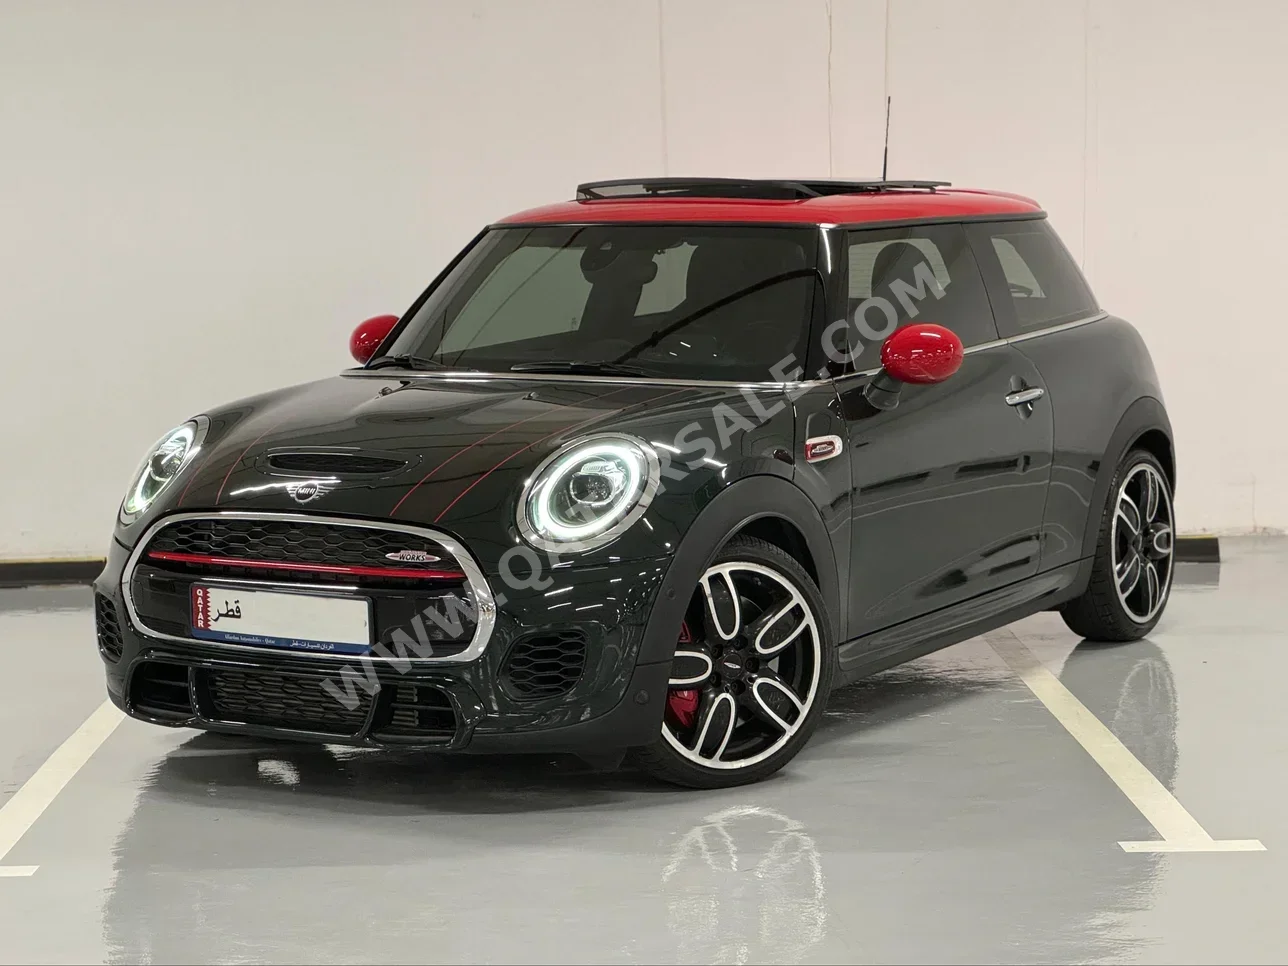 Mini  Cooper  JCW  2020  Automatic  29,500 Km  4 Cylinder  Front Wheel Drive (FWD)  Hatchback  Olive Green